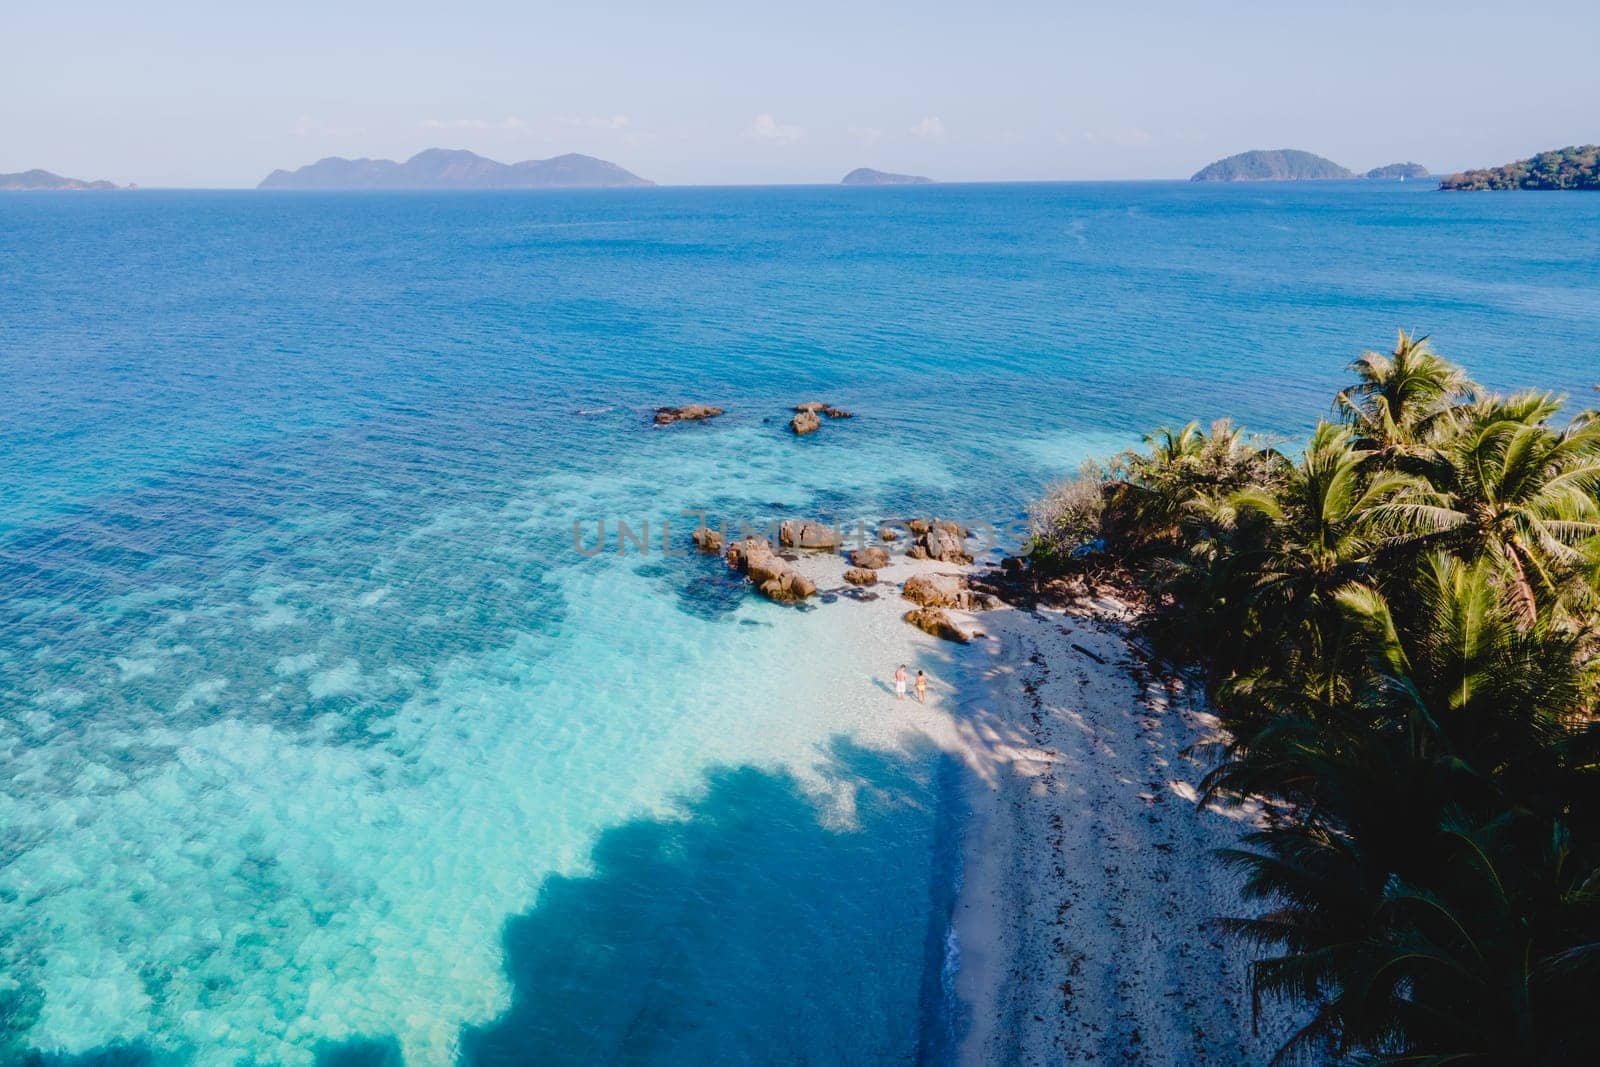 Drone aerial view at Koh Wai Island Trat Thailand. A young couple of men and women walking on a tropical beach during a luxury vacation in Thailand with a turqouse colored ocean